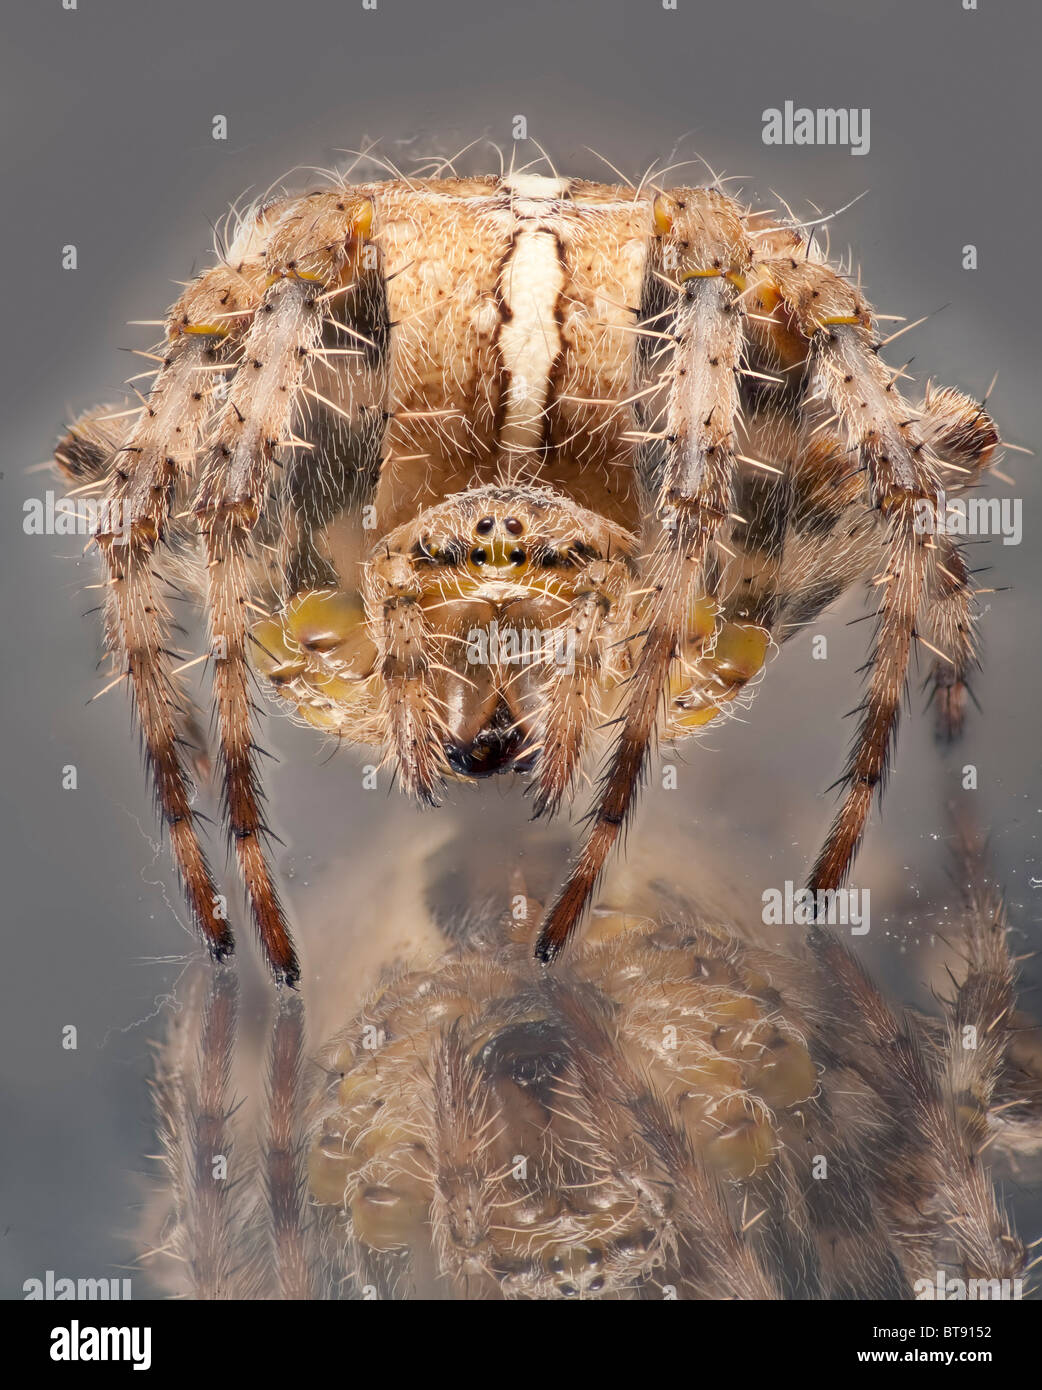 Front view of a garden spider with reflection on glass Stock Photo